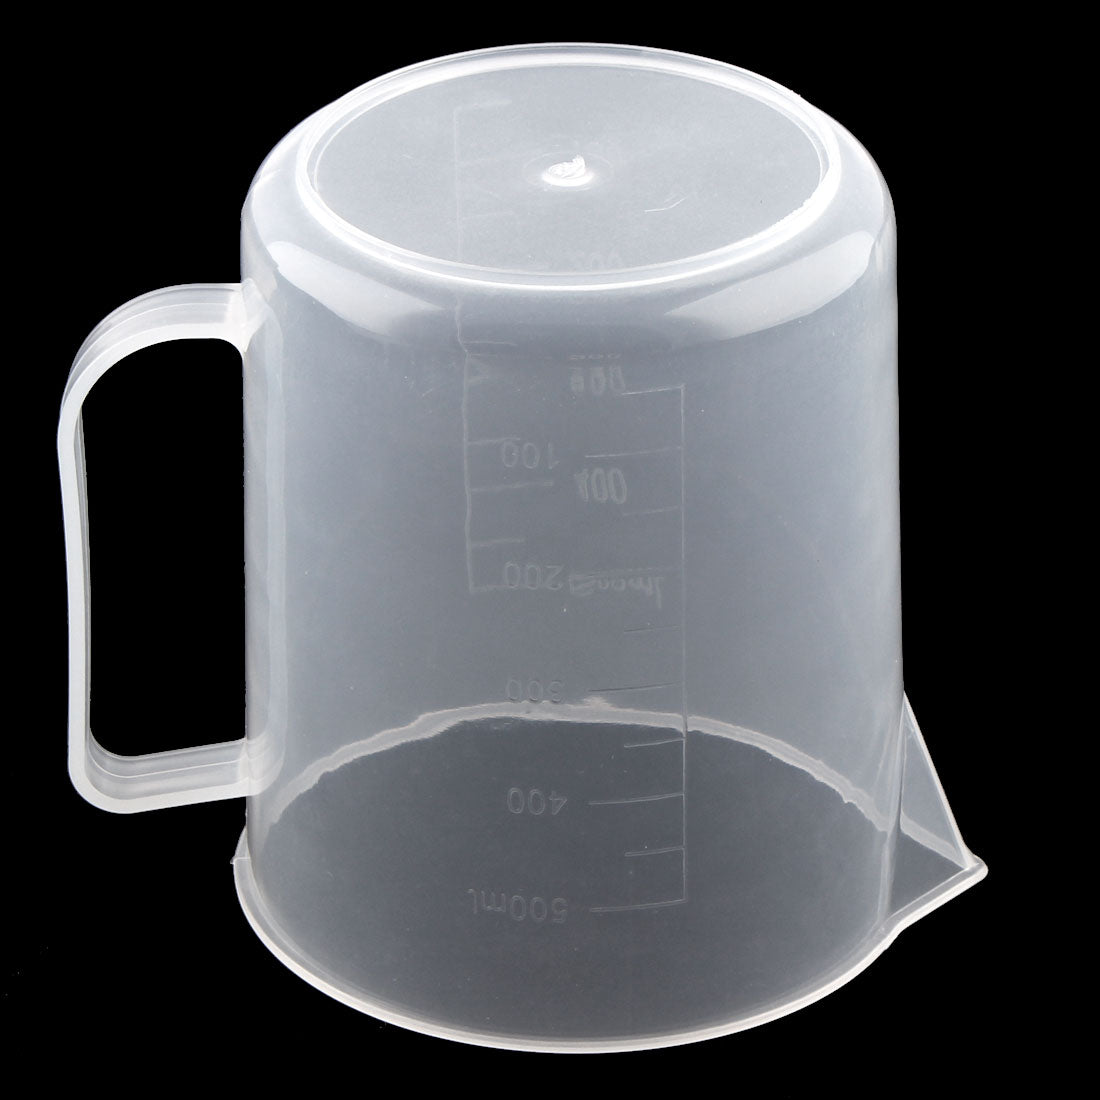 uxcell Uxcell Kitchen Laboratory Environmentally Plastic Measuring Cup Clear 500ml Capacity